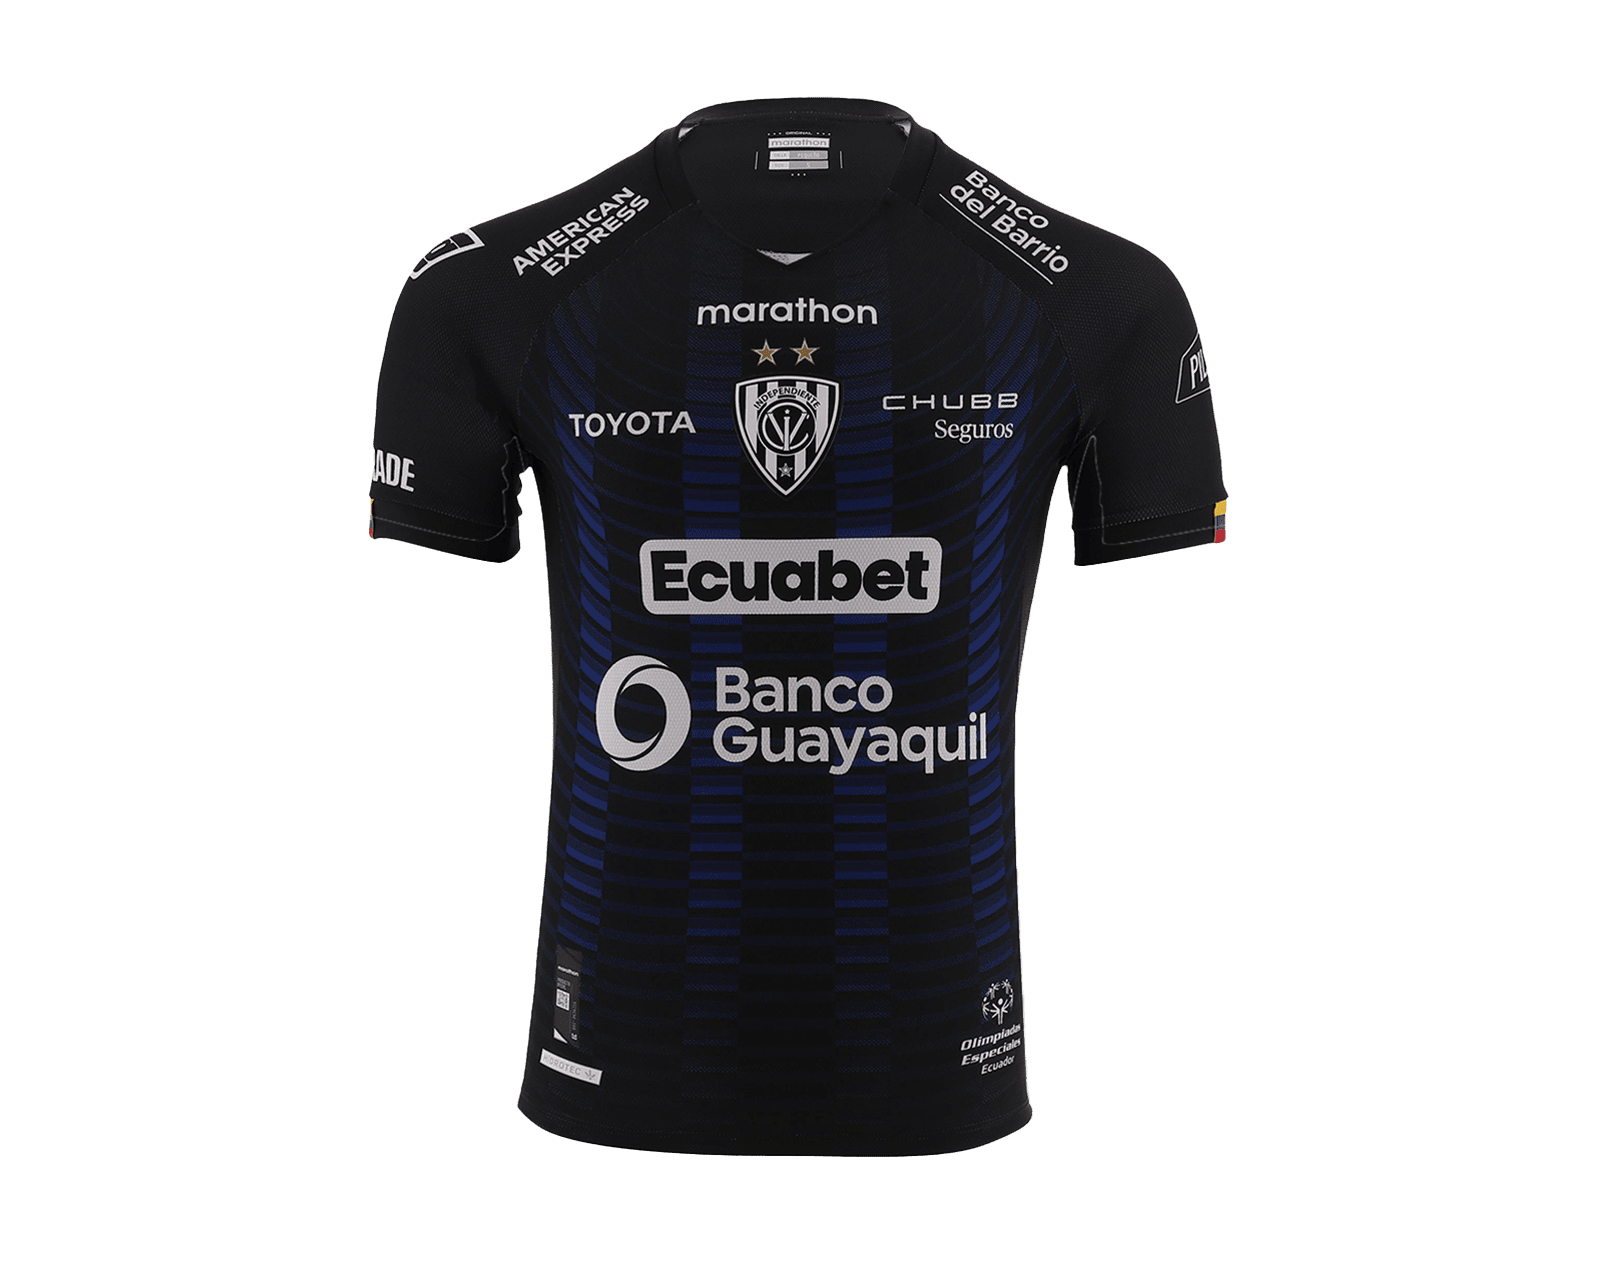 A jersey with lots of logos